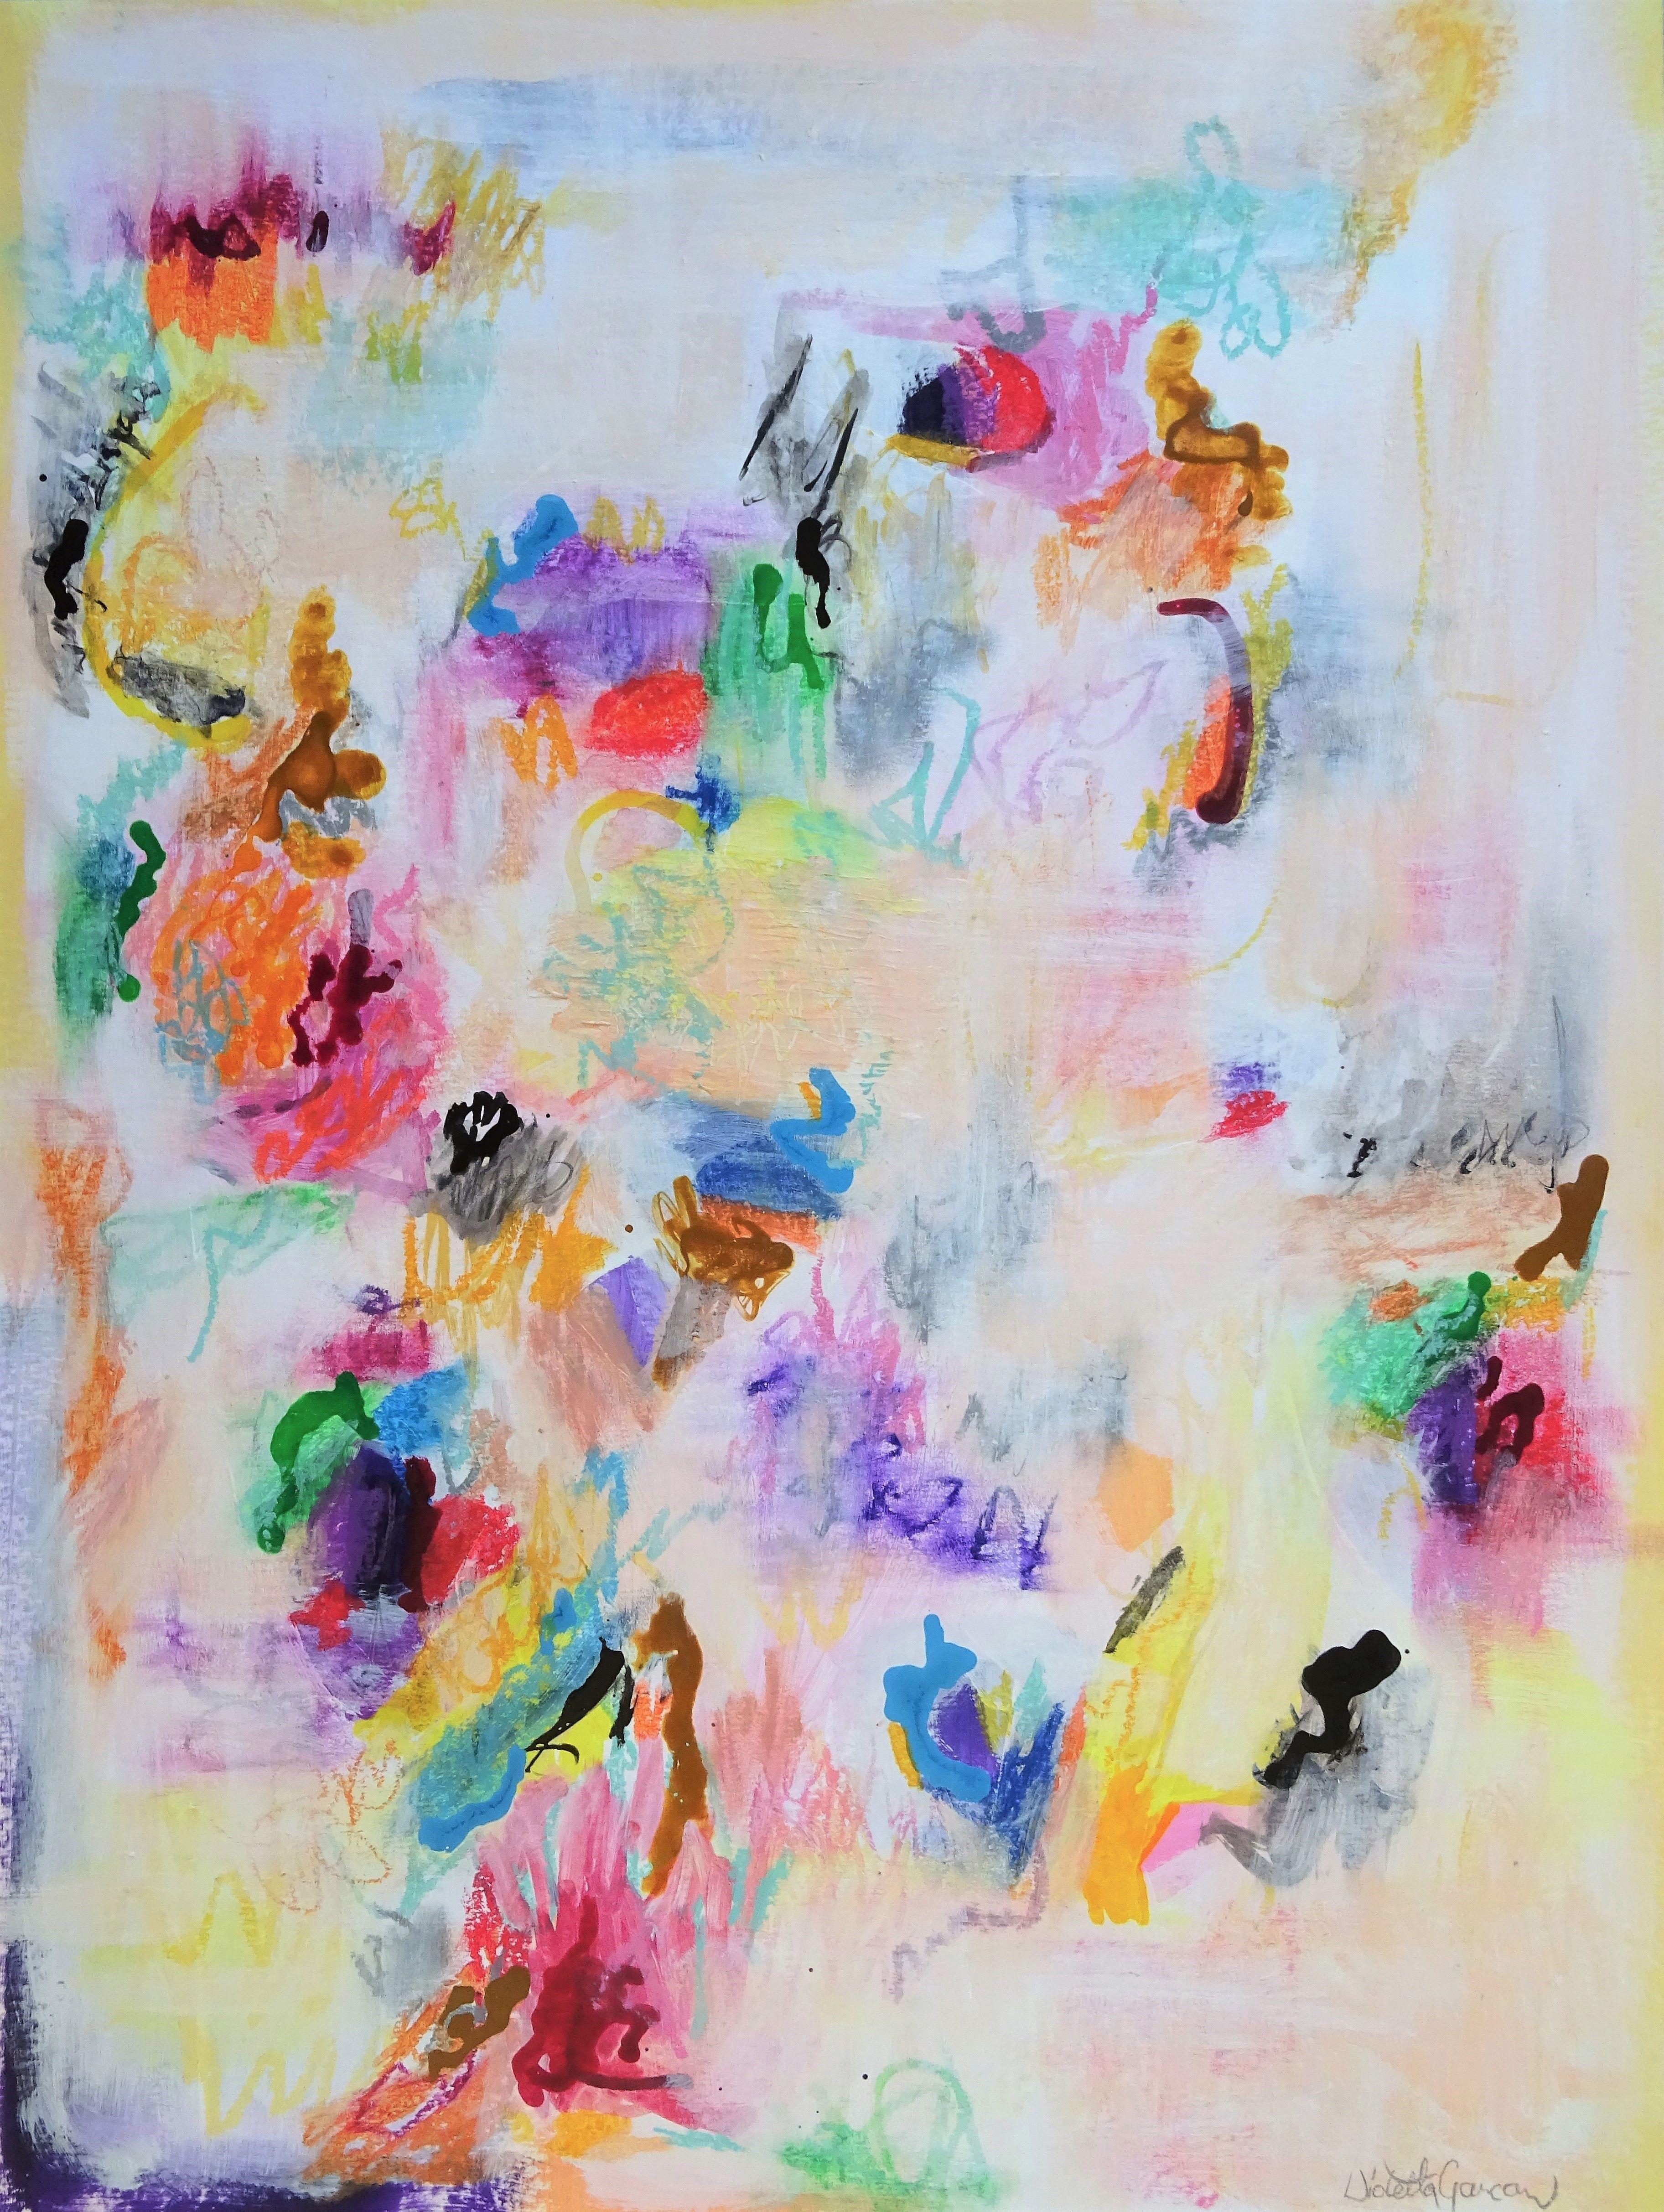 Wioletta Gancarz Abstract Painting - Secrets, Painting, Acrylic on Paper